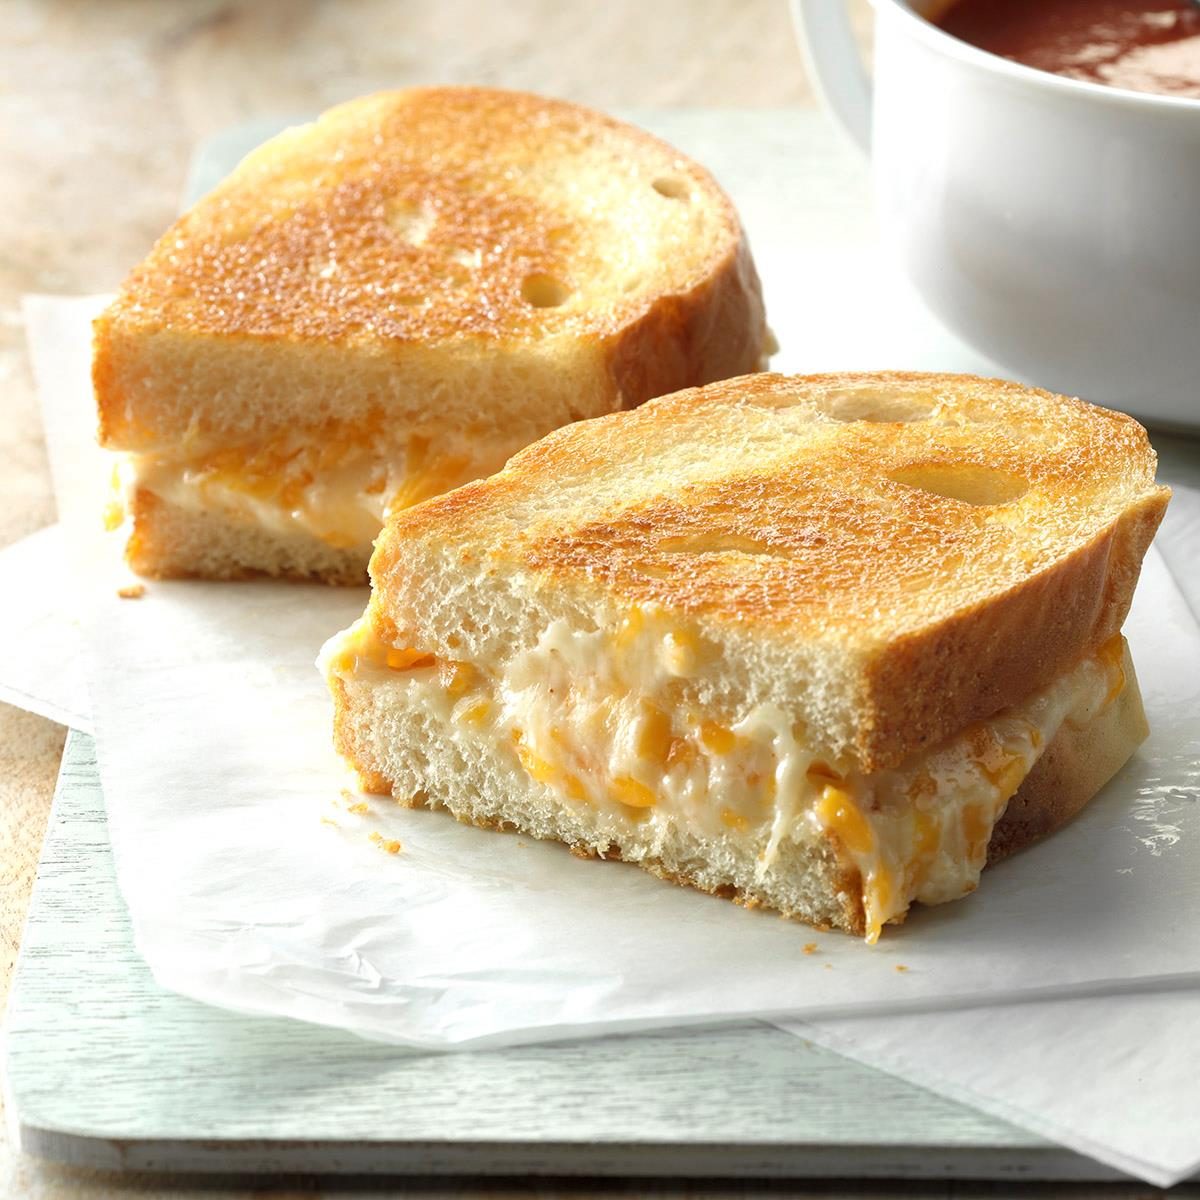 Day 16: The Ultimate Grilled Cheese